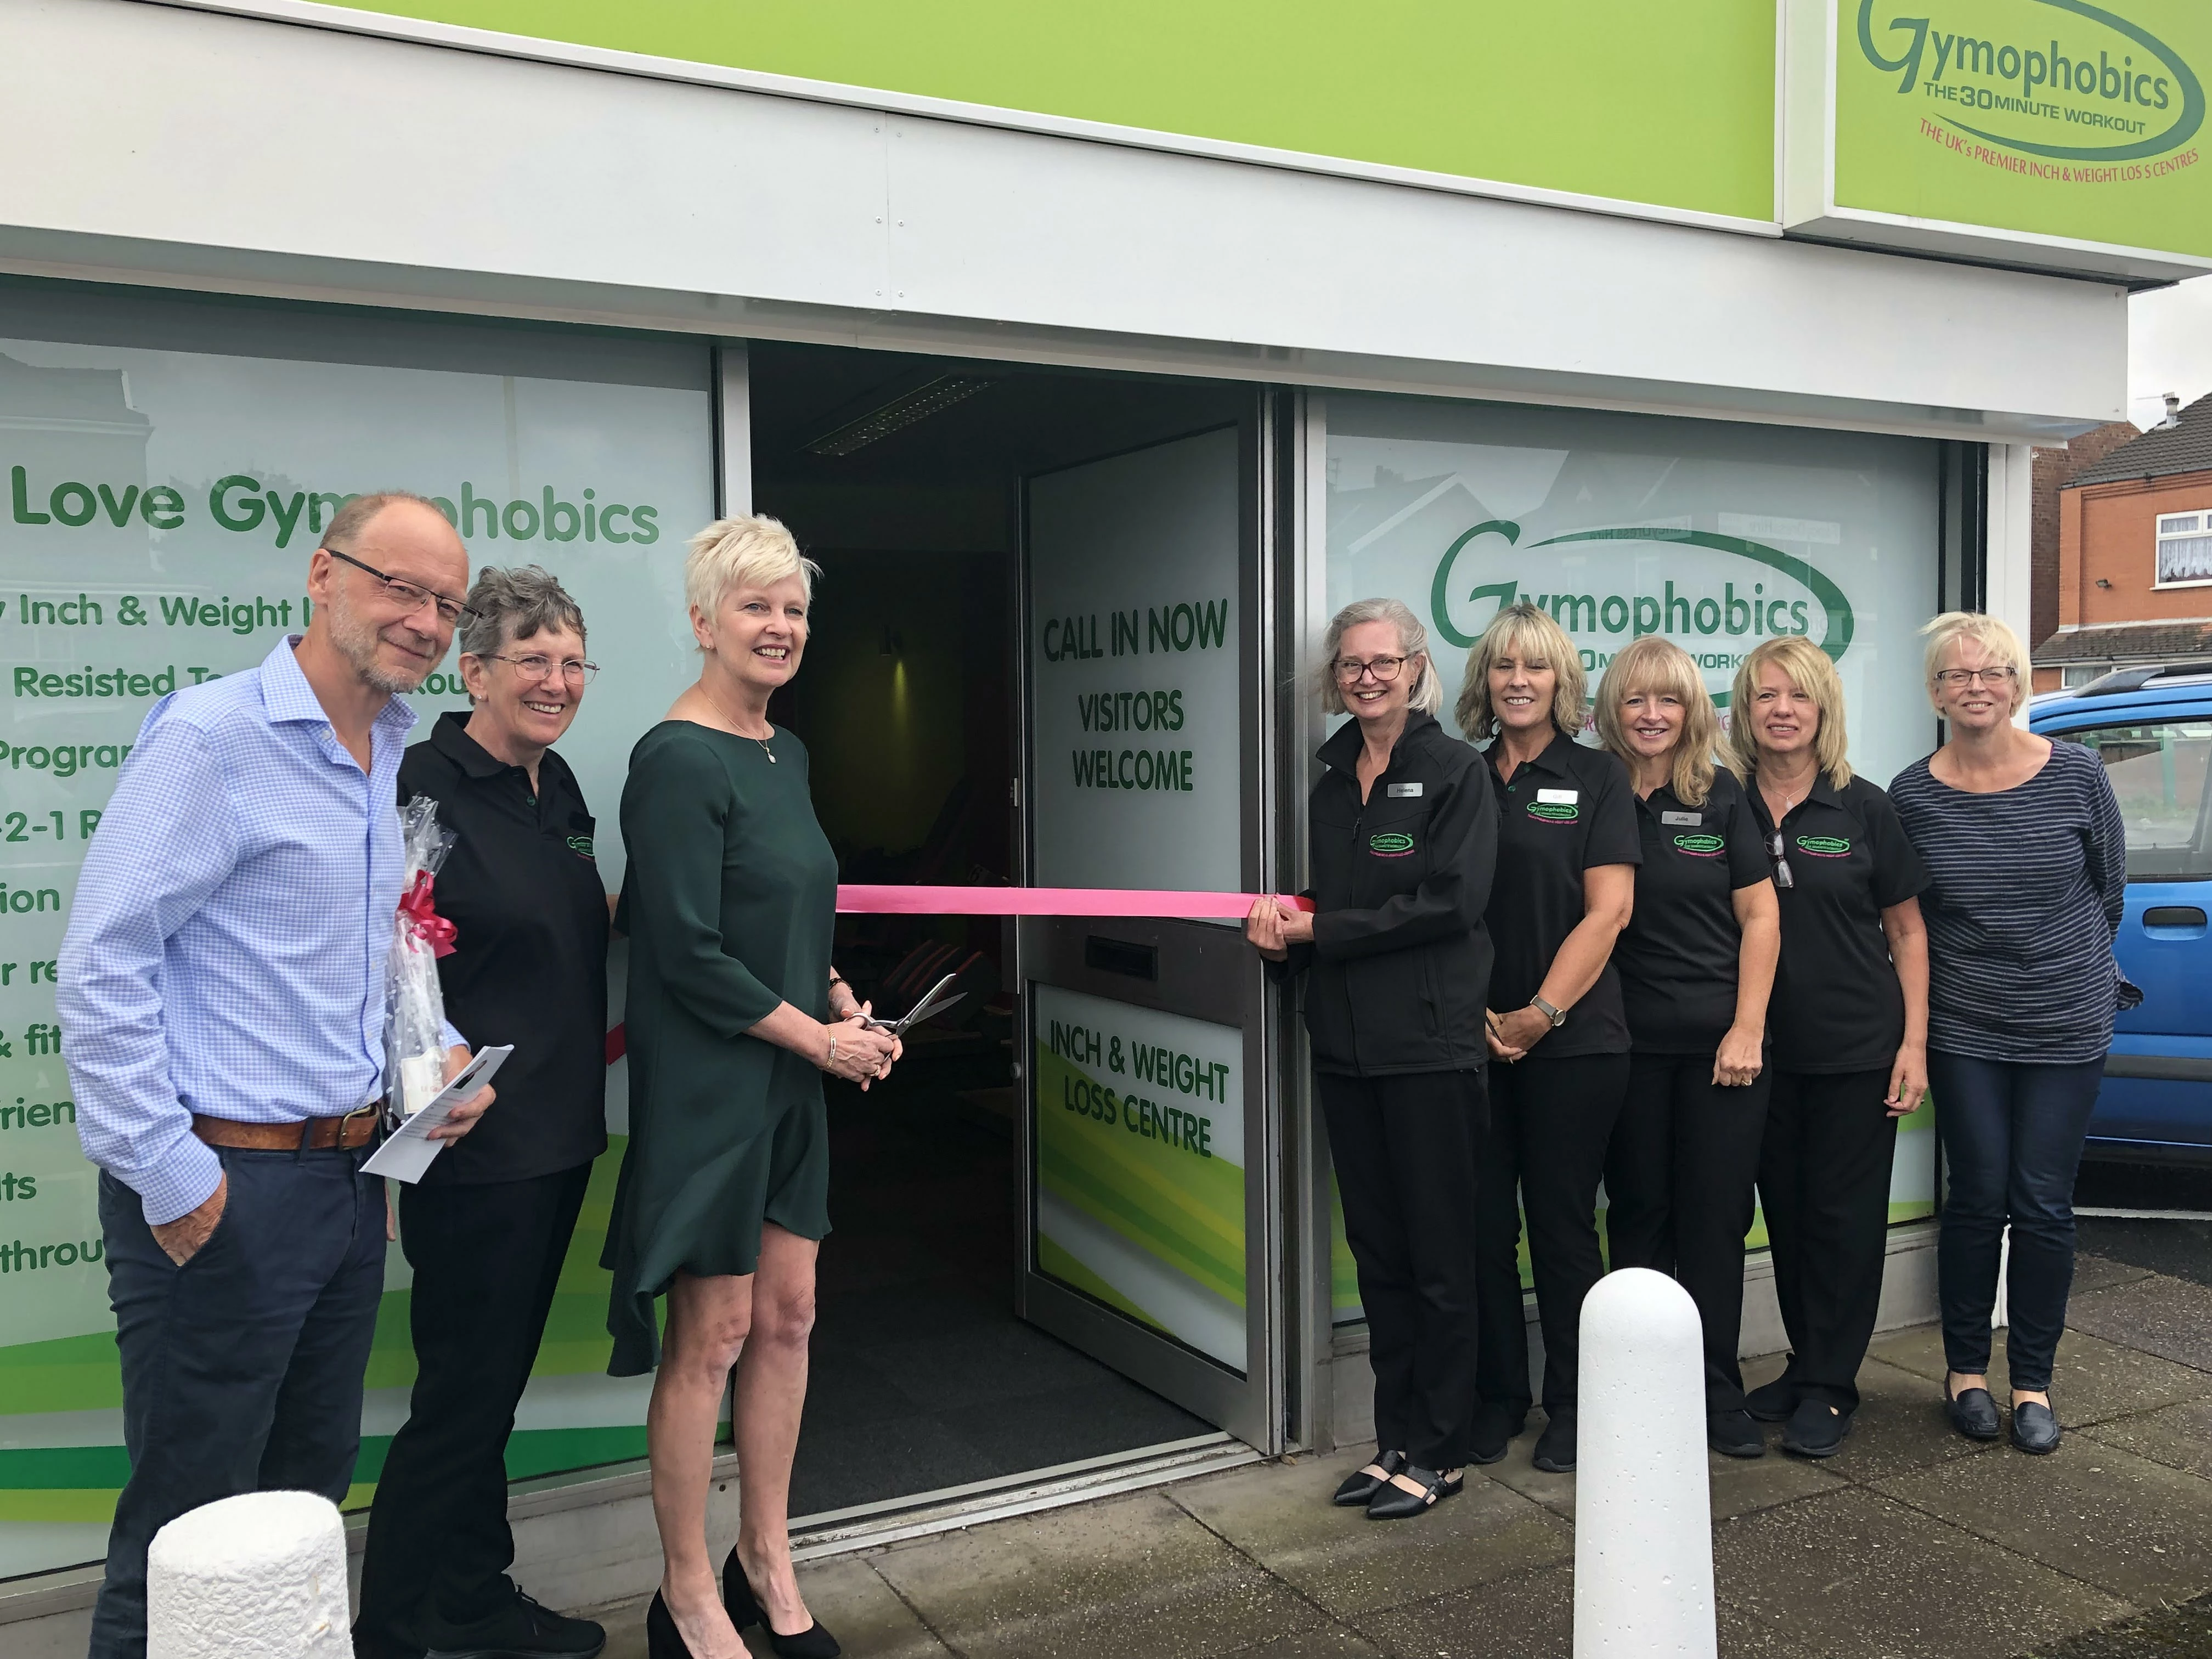 The ribbon cut by Gymophobics founder Donna Hubbard, with help of left to right Dr David Unwin, new co-owners Anne Molyneux and Helena Knapton, the gym instructors and Dr Jen Unwin (far right).